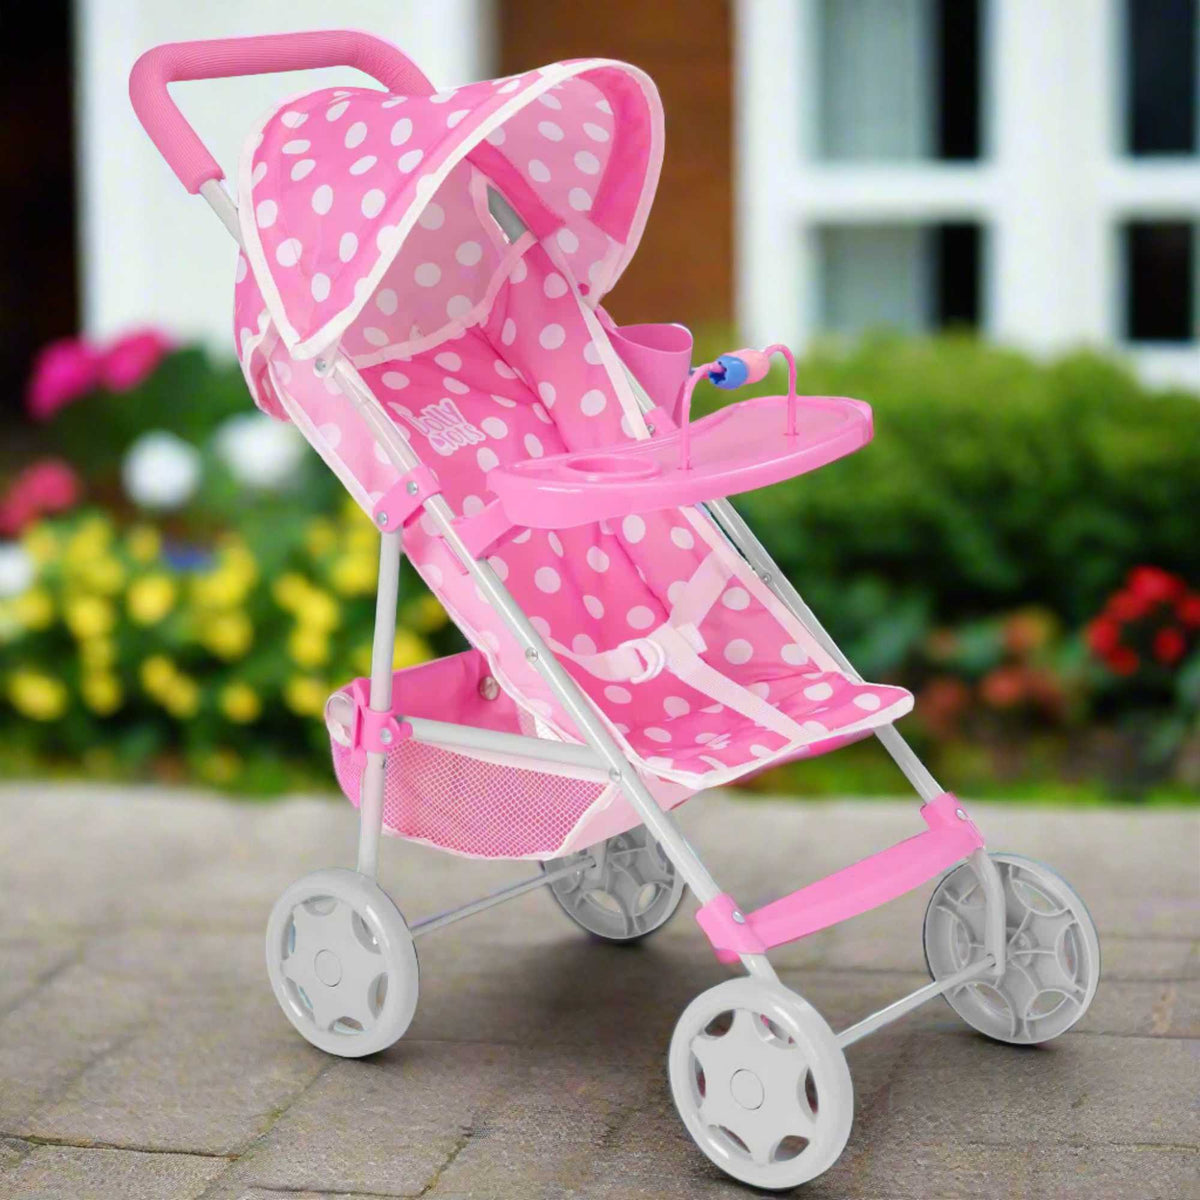 Dolly Tots Playtime Dolls Pushchair - Fun and Functional Toy Pushchair for Dolls, Perfect for Playtime